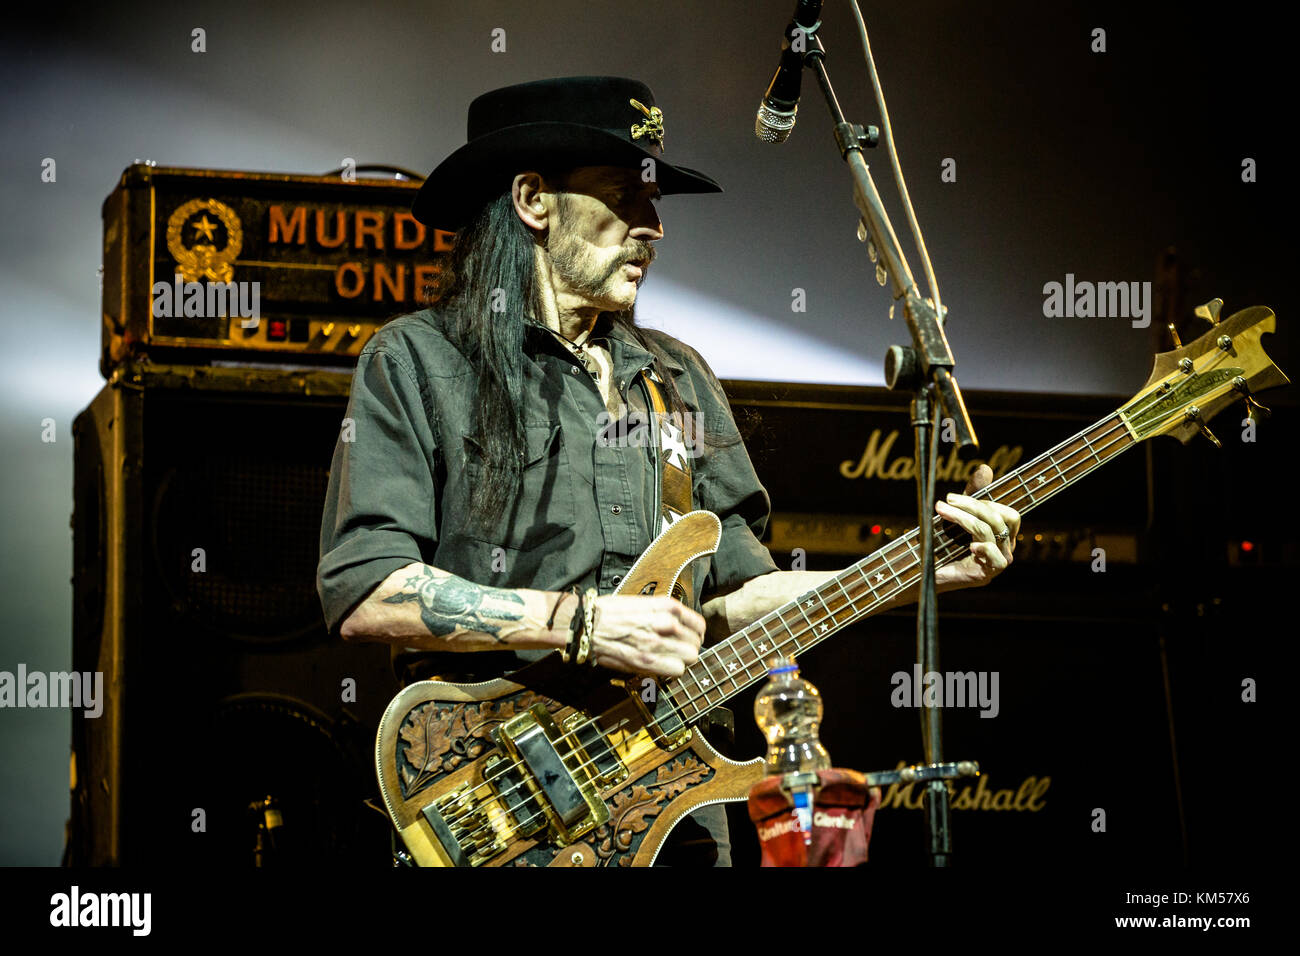 The English hard rock band Motörhead performs a live concert at the  Mitsubishe Electric Halle in Düsseldorf. Here bassist, womanizer and  vocalist Lemmy is seen live on stage. Germnay, 17/11 2015 Stock